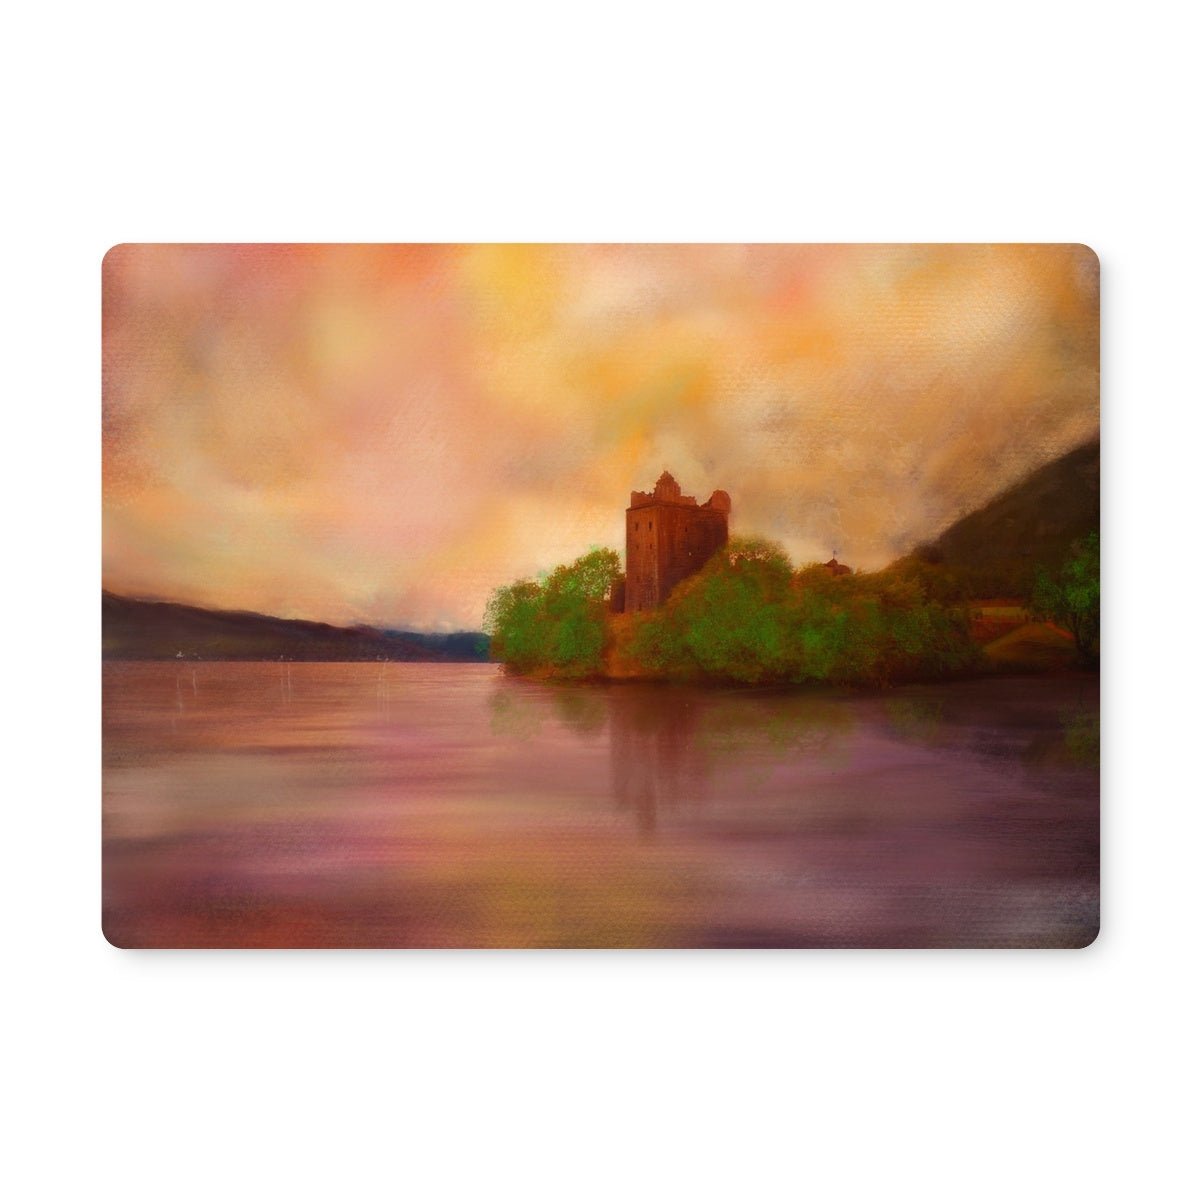 Urquhart Castle Art Gifts Placemat-Placemats-Scottish Castles Art Gallery-4 Placemats-Paintings, Prints, Homeware, Art Gifts From Scotland By Scottish Artist Kevin Hunter